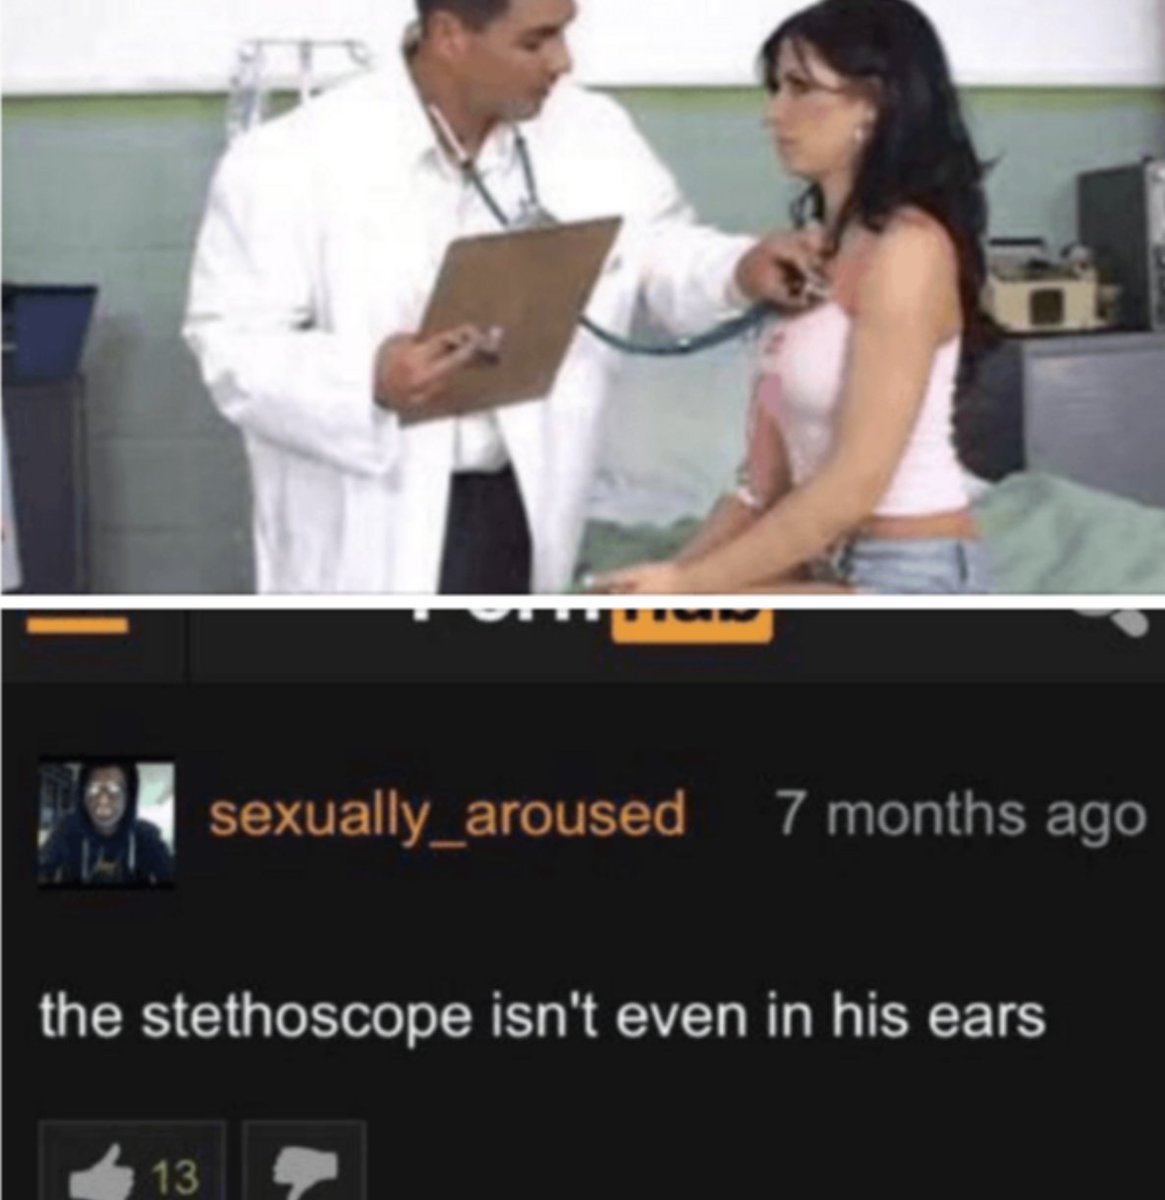 stethoscope isn t even in his ears - sexually_aroused 7 months ago the stethoscope isn't even in his ears 13